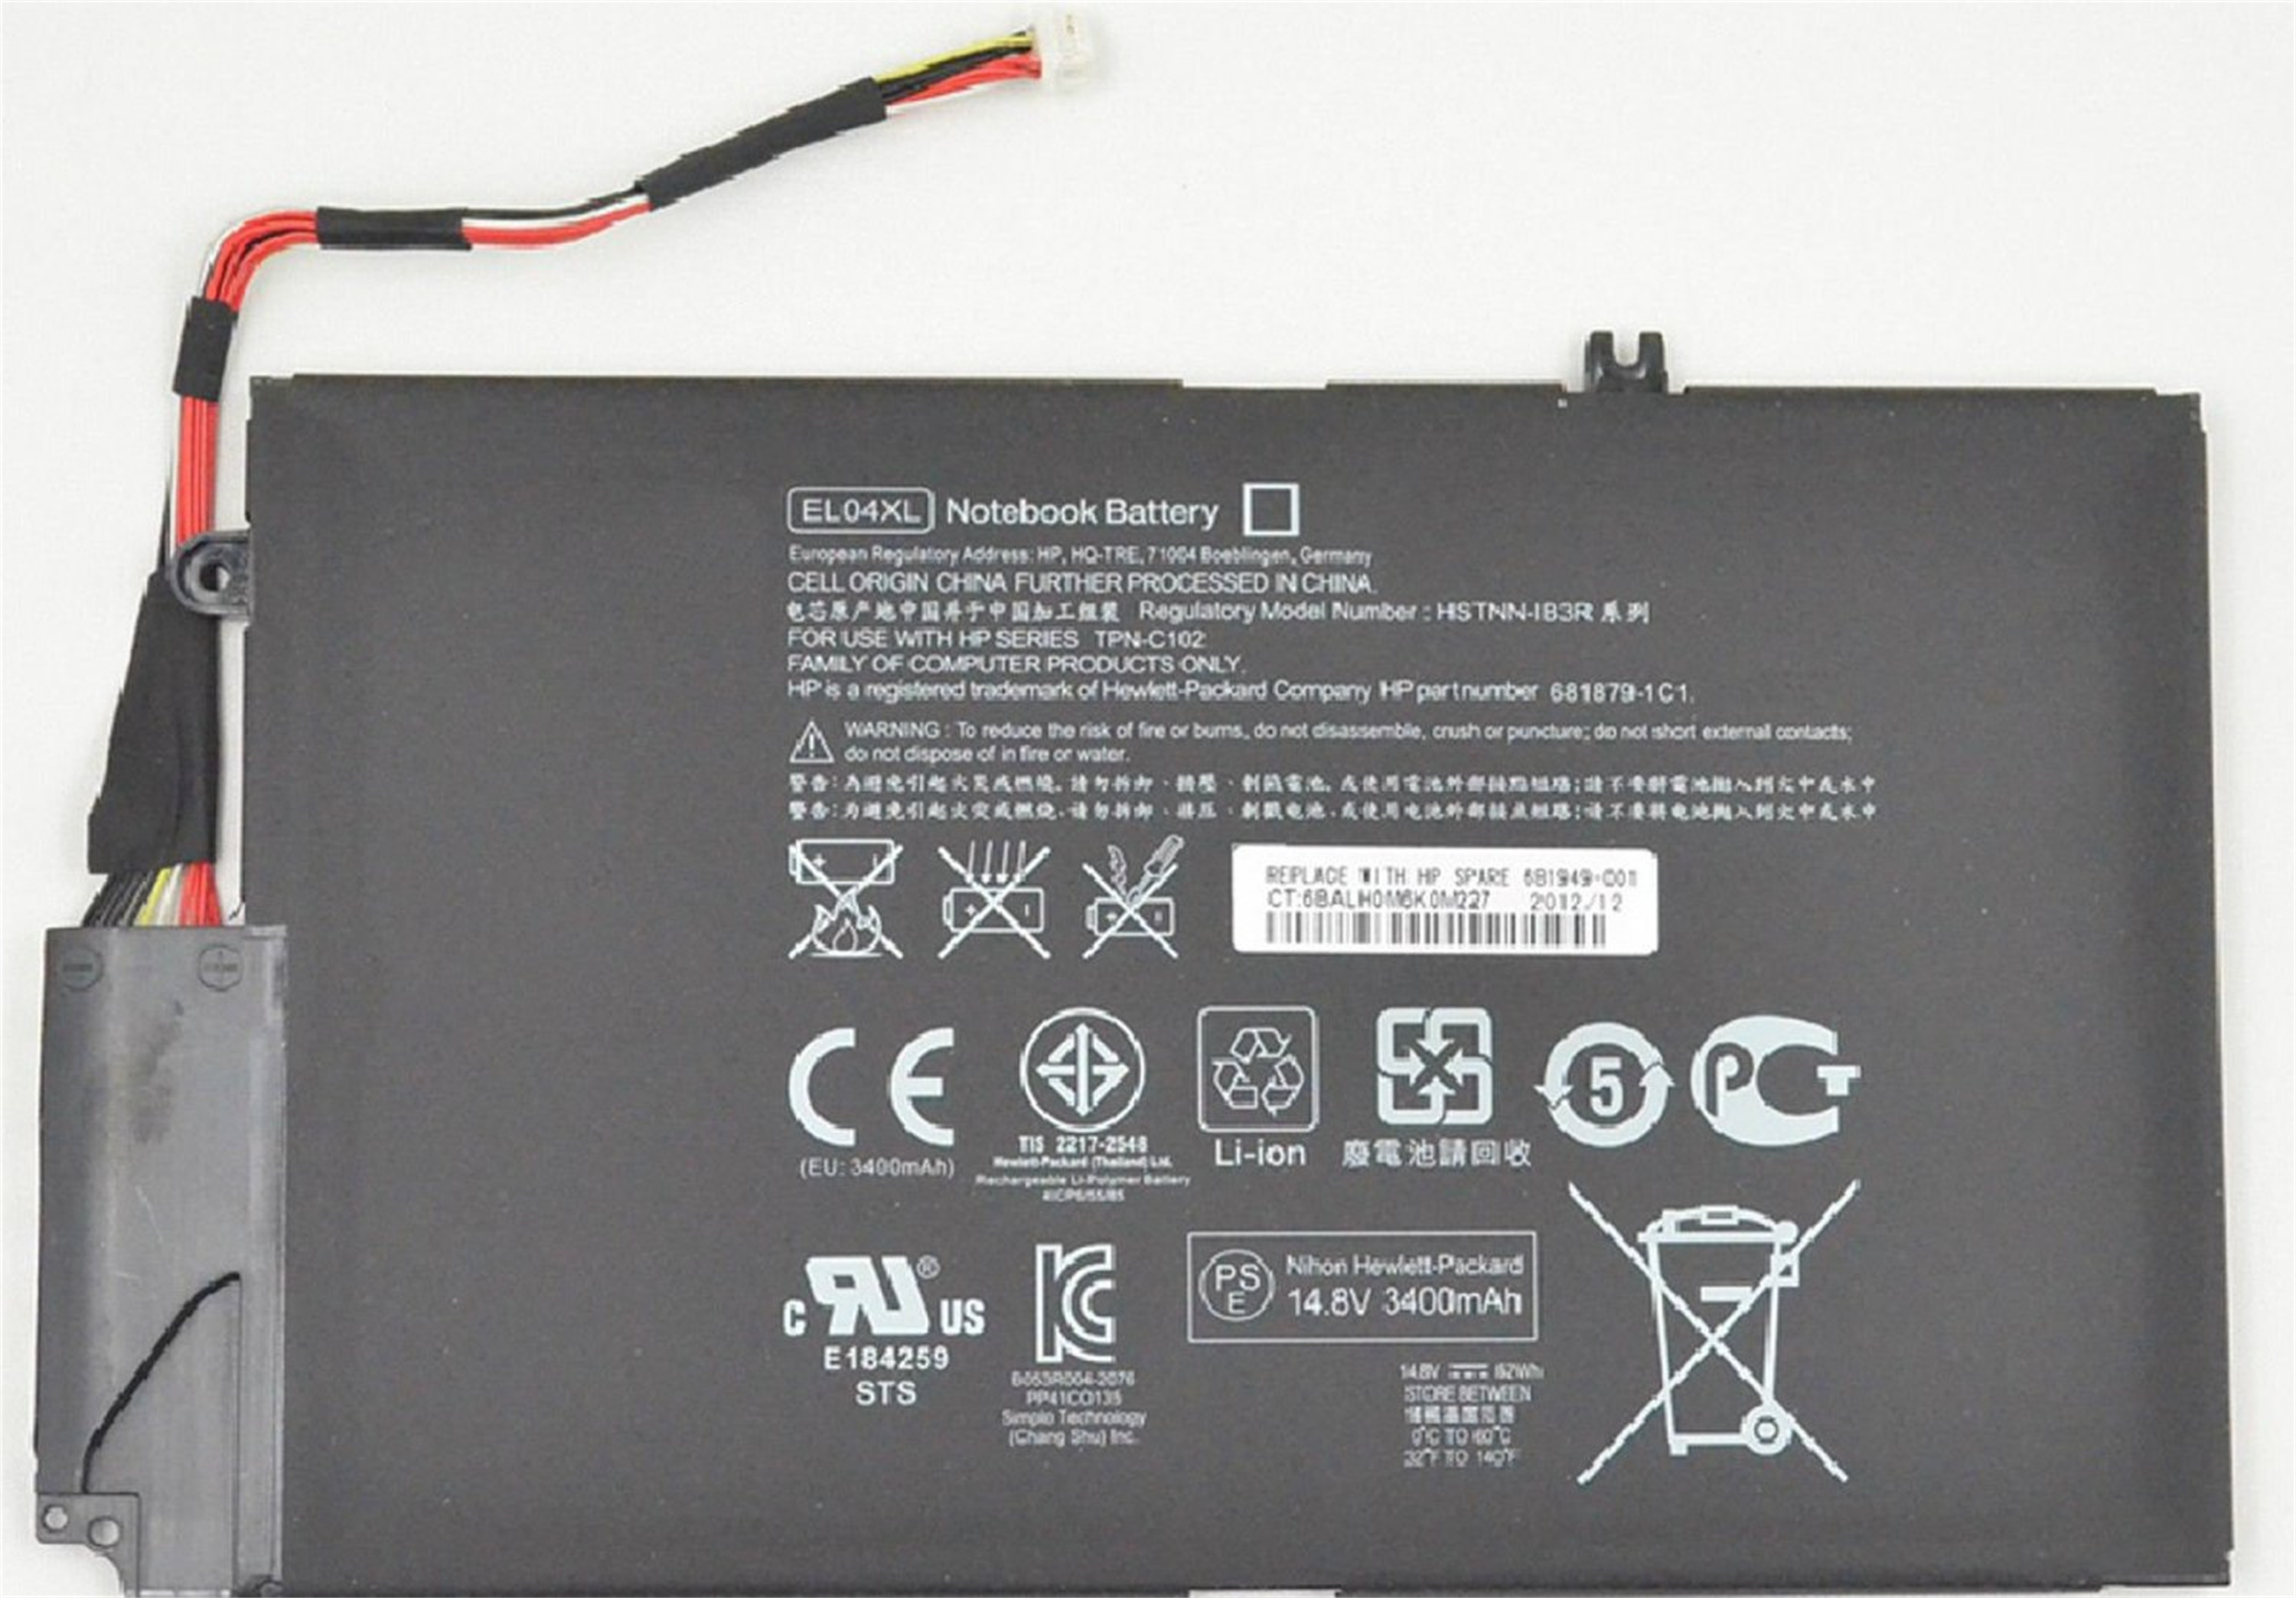 EL04XL rechargeable lithium ion Notebook battery Laptop battery For HP ENVY 4 HSTNN-UB3R HSTNN-IB3R Battery TPN-C102